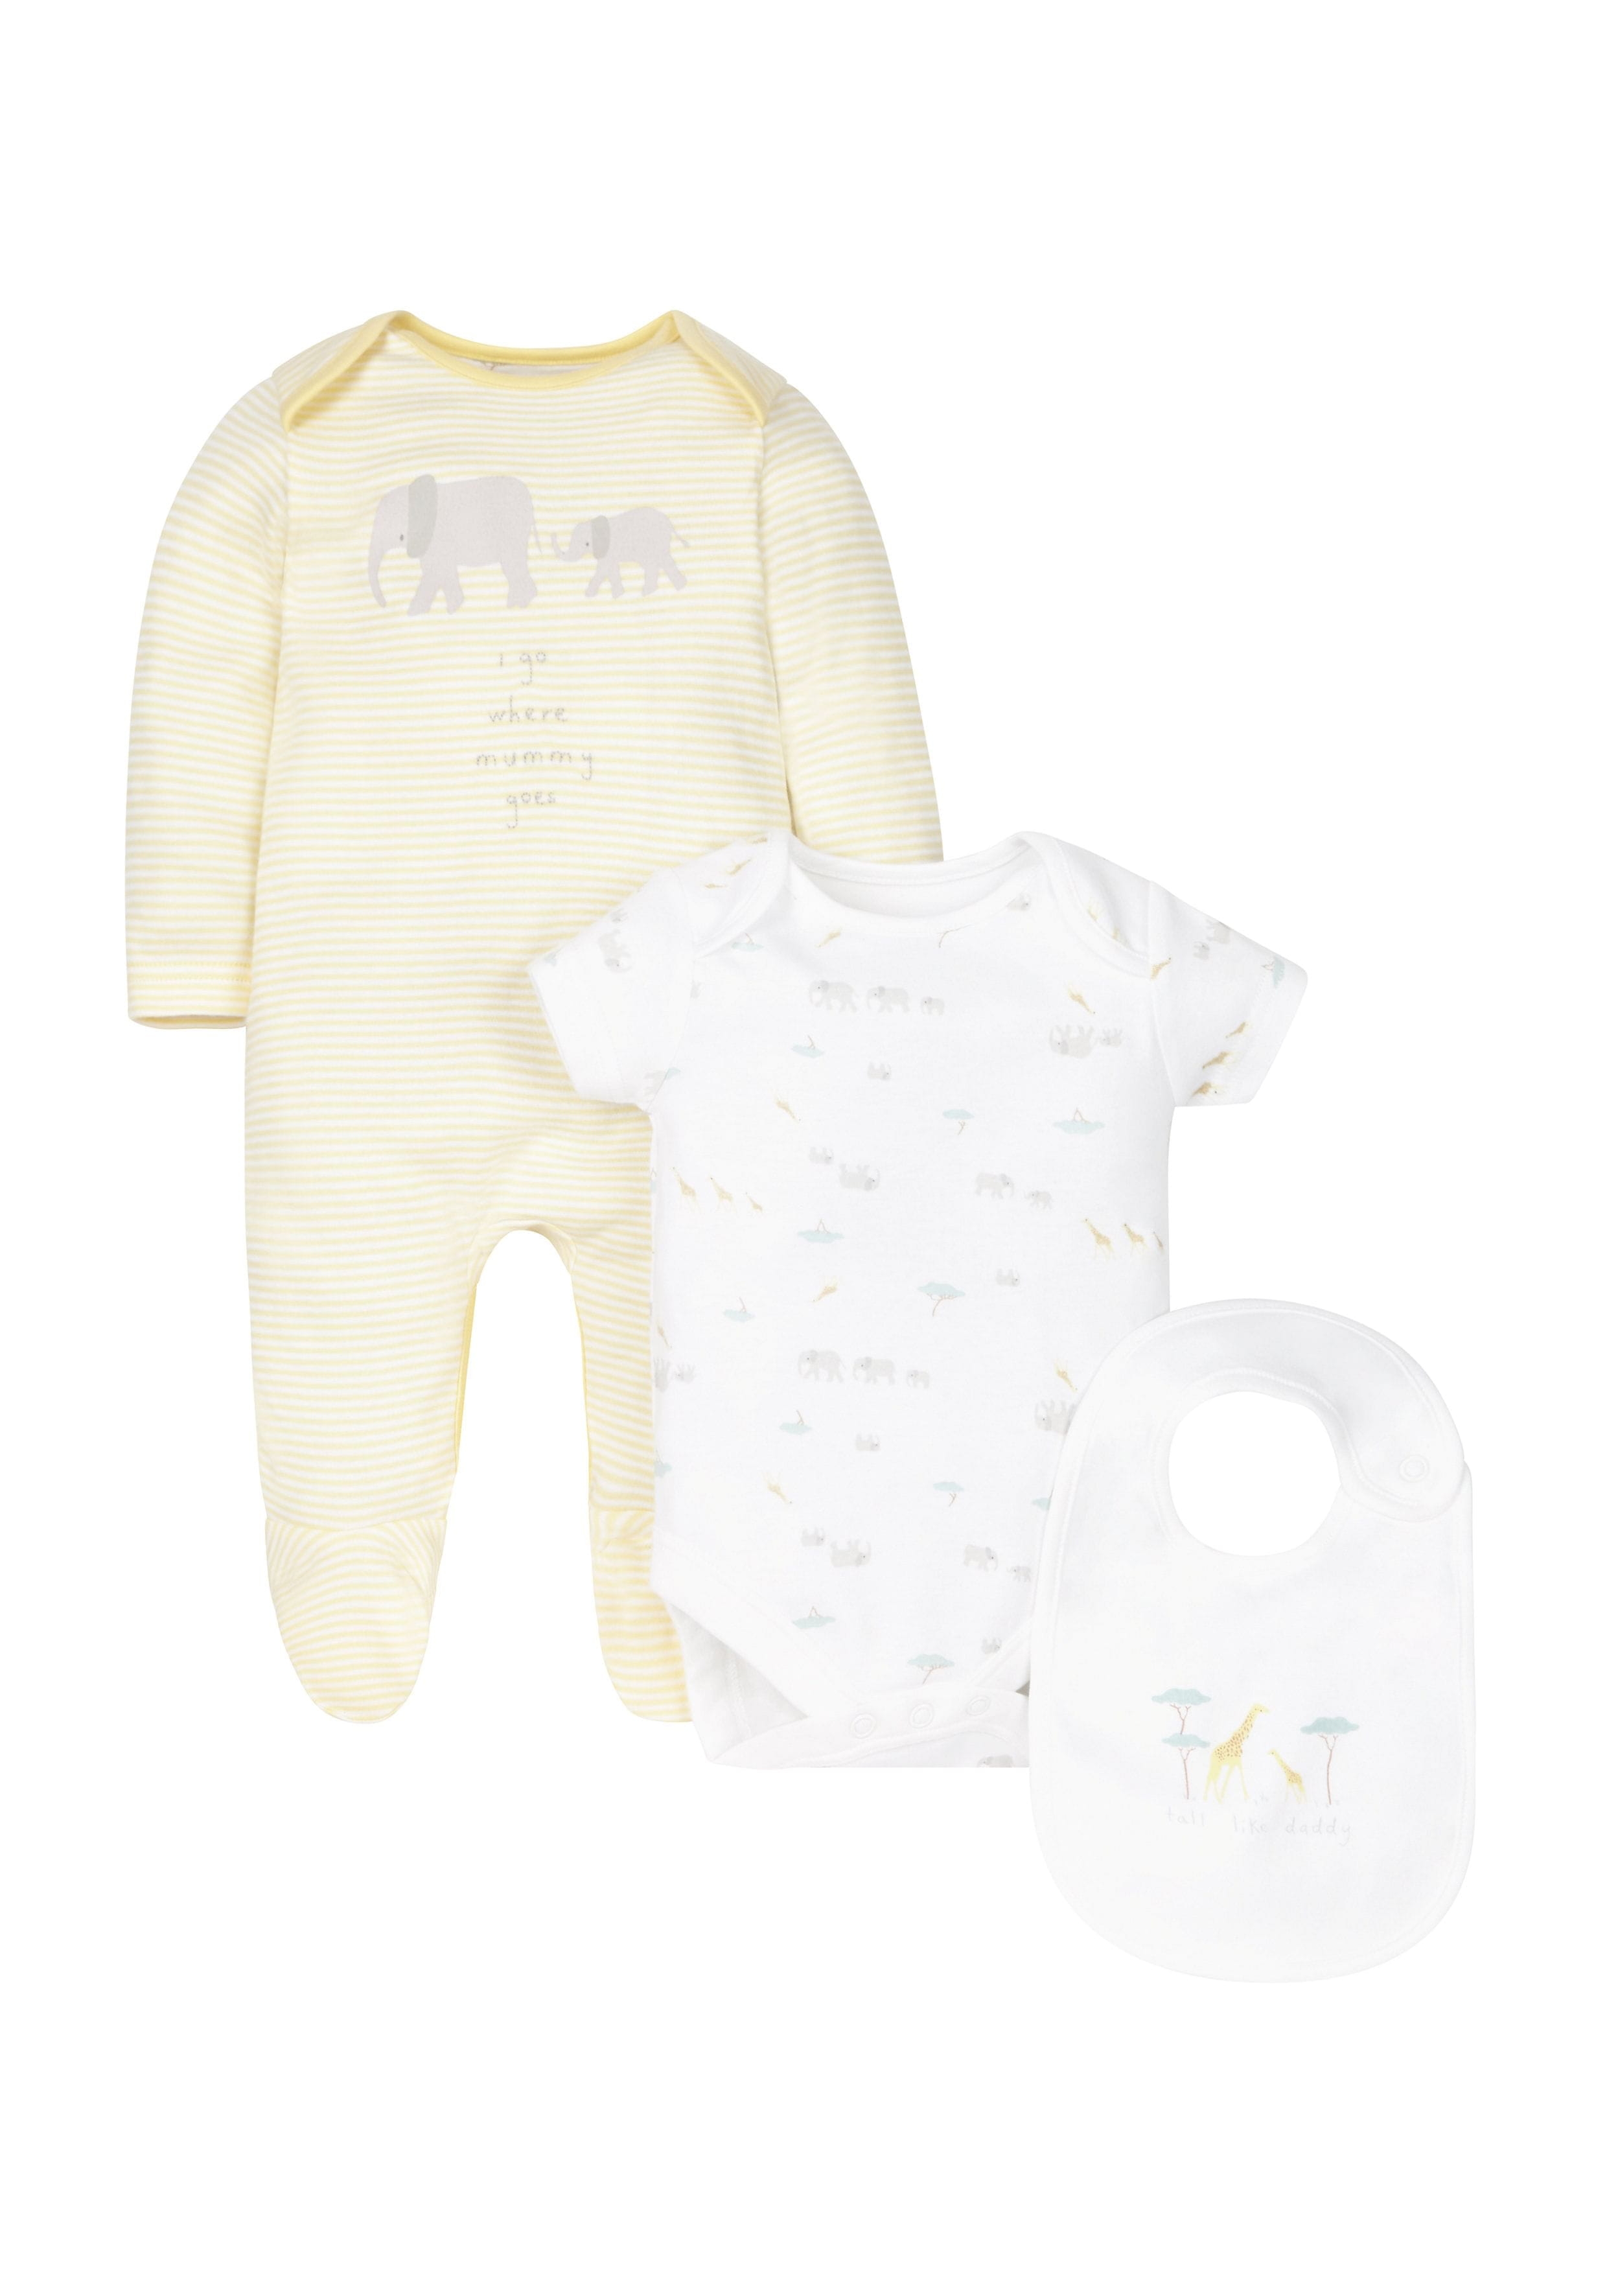 Mothercare | Unisex Mummy And Daddy Set - 3 Piece - White 0